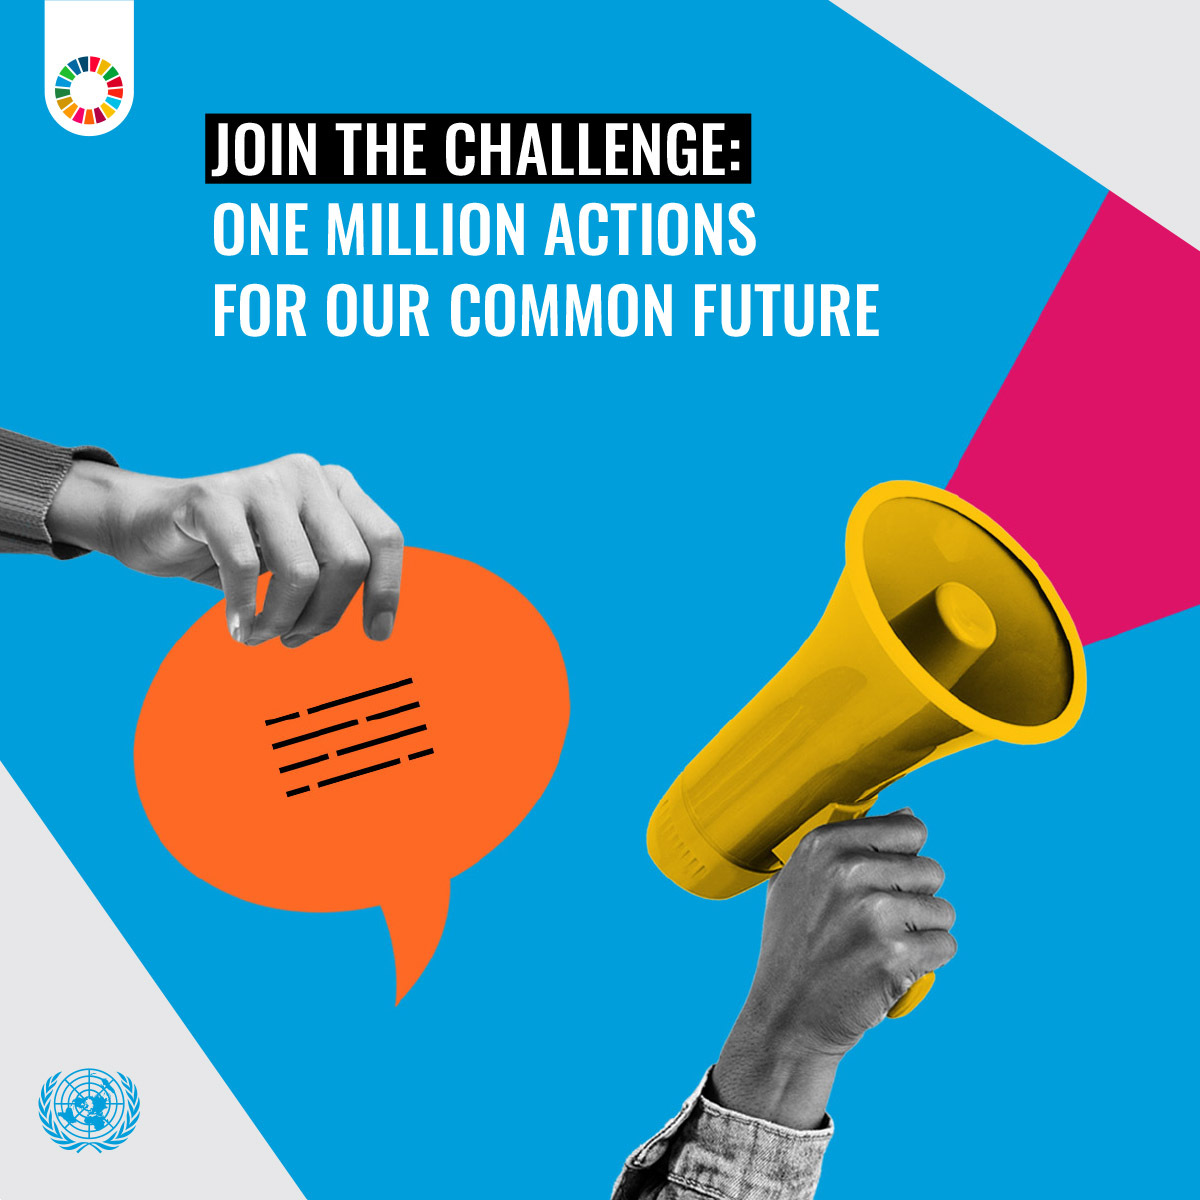 📣 Youth everywhere are participating in the ECOSOC #Youth2030 Forum taking place in NYC 16-18 April, and we want YOU to #ActNow – speak up and make your voices heard! Join the challenge to reach 1M actions for #OurCommonFuture ➡️ bit.ly/SoF24-SpeakUp